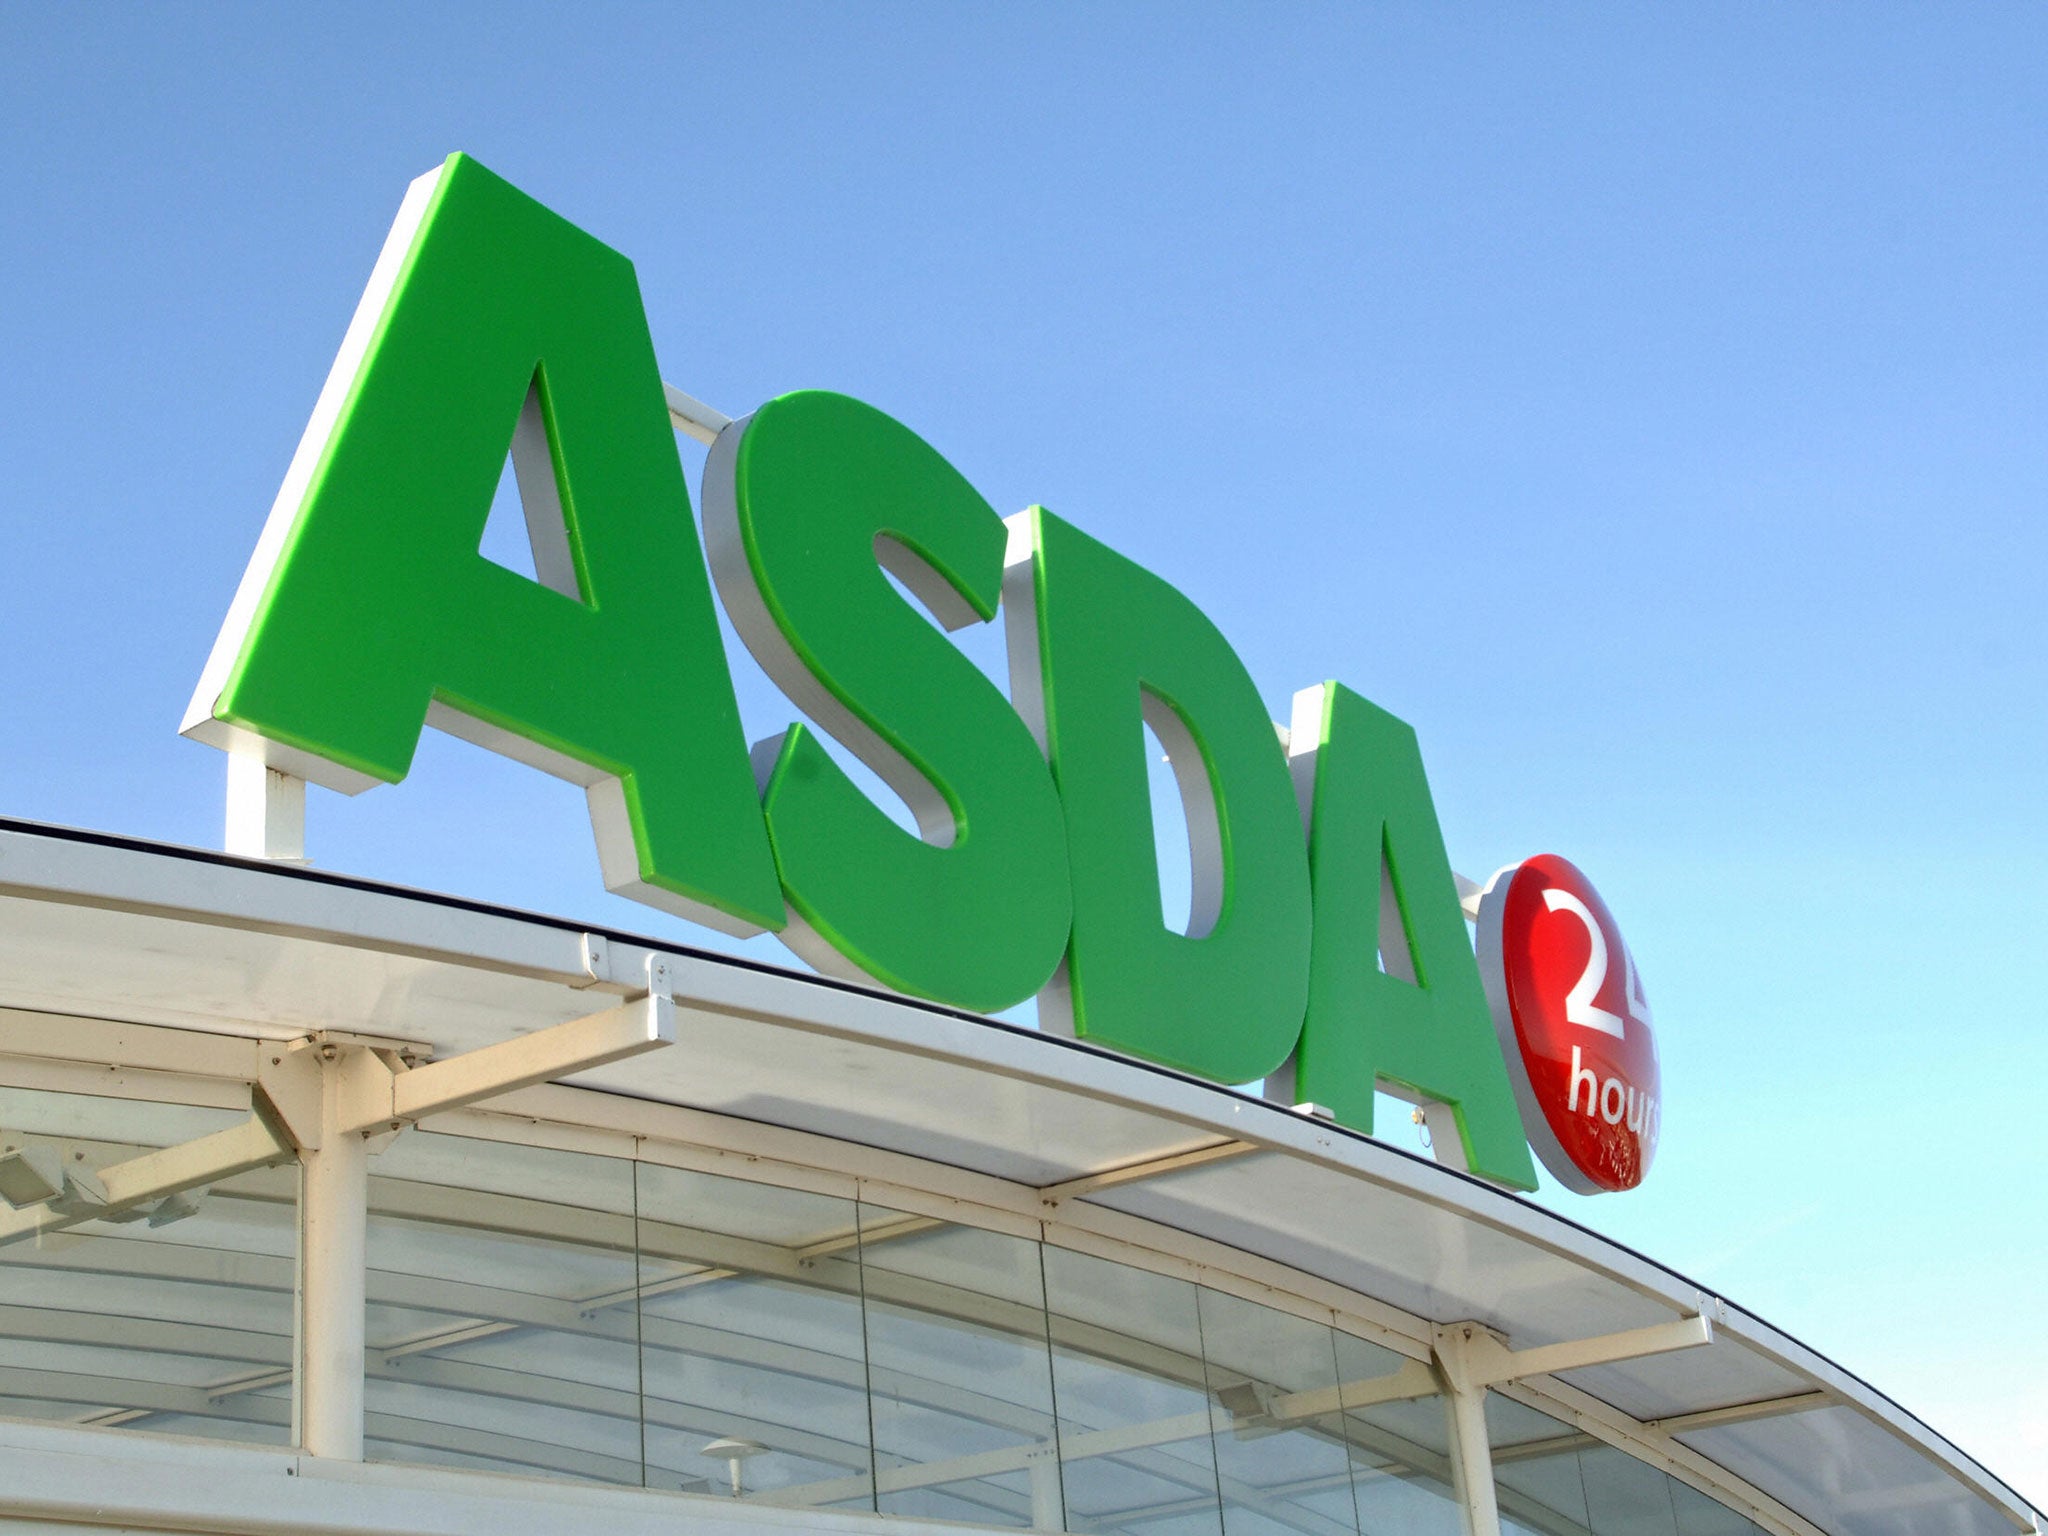 Asda will spend a further £500m cutting prices in its stores